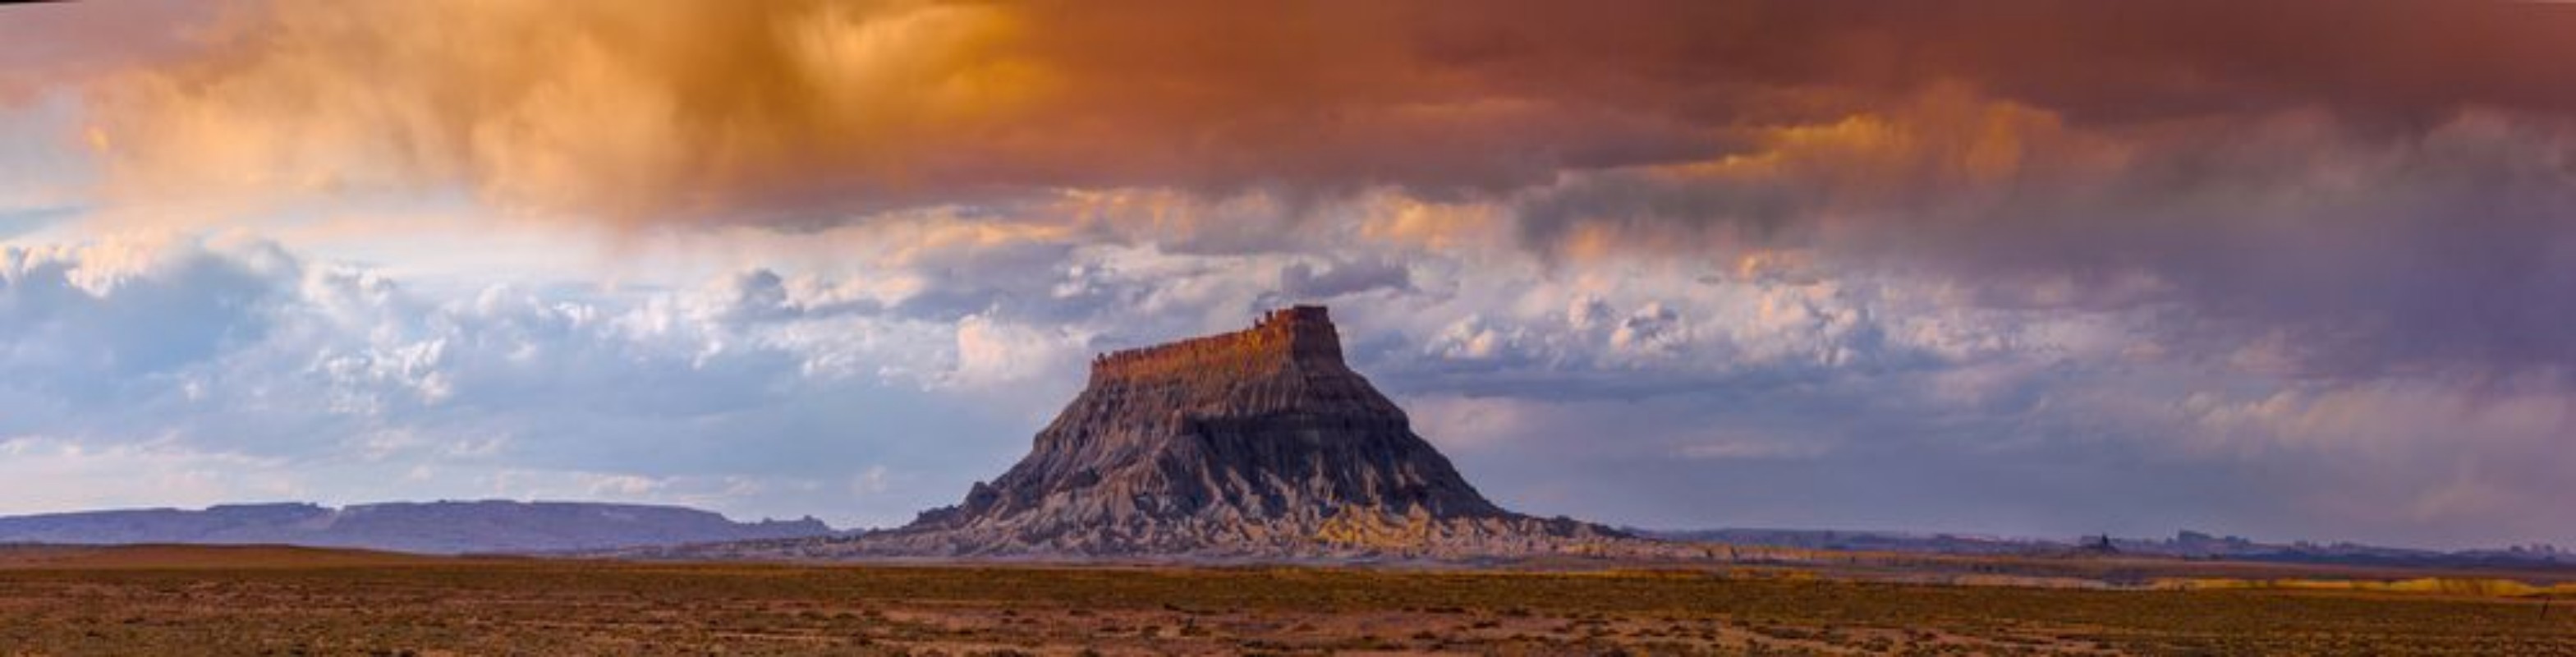 Picture of Factory Butte Utah